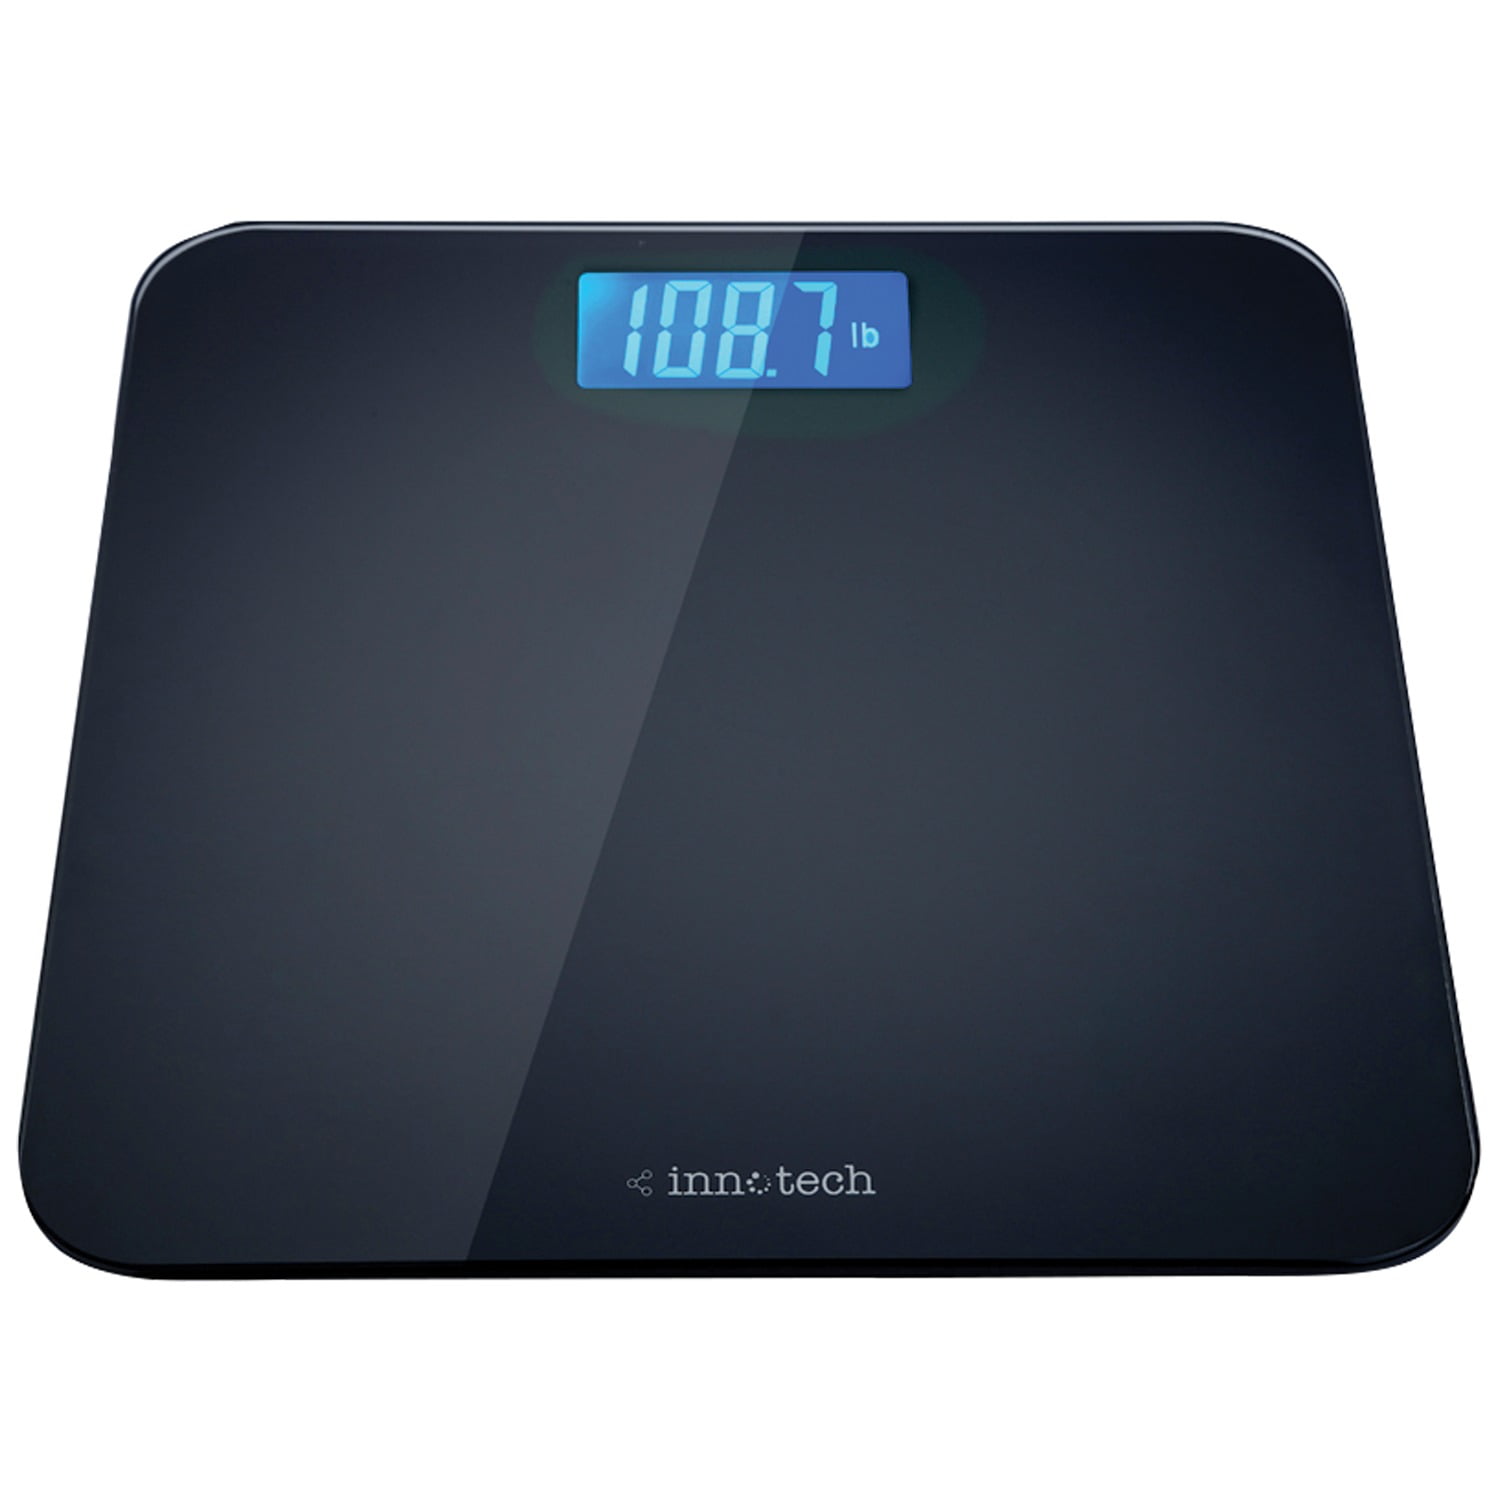 Digital Bathroom Weighing Scales Electronic LCD Backlight Display Black New 